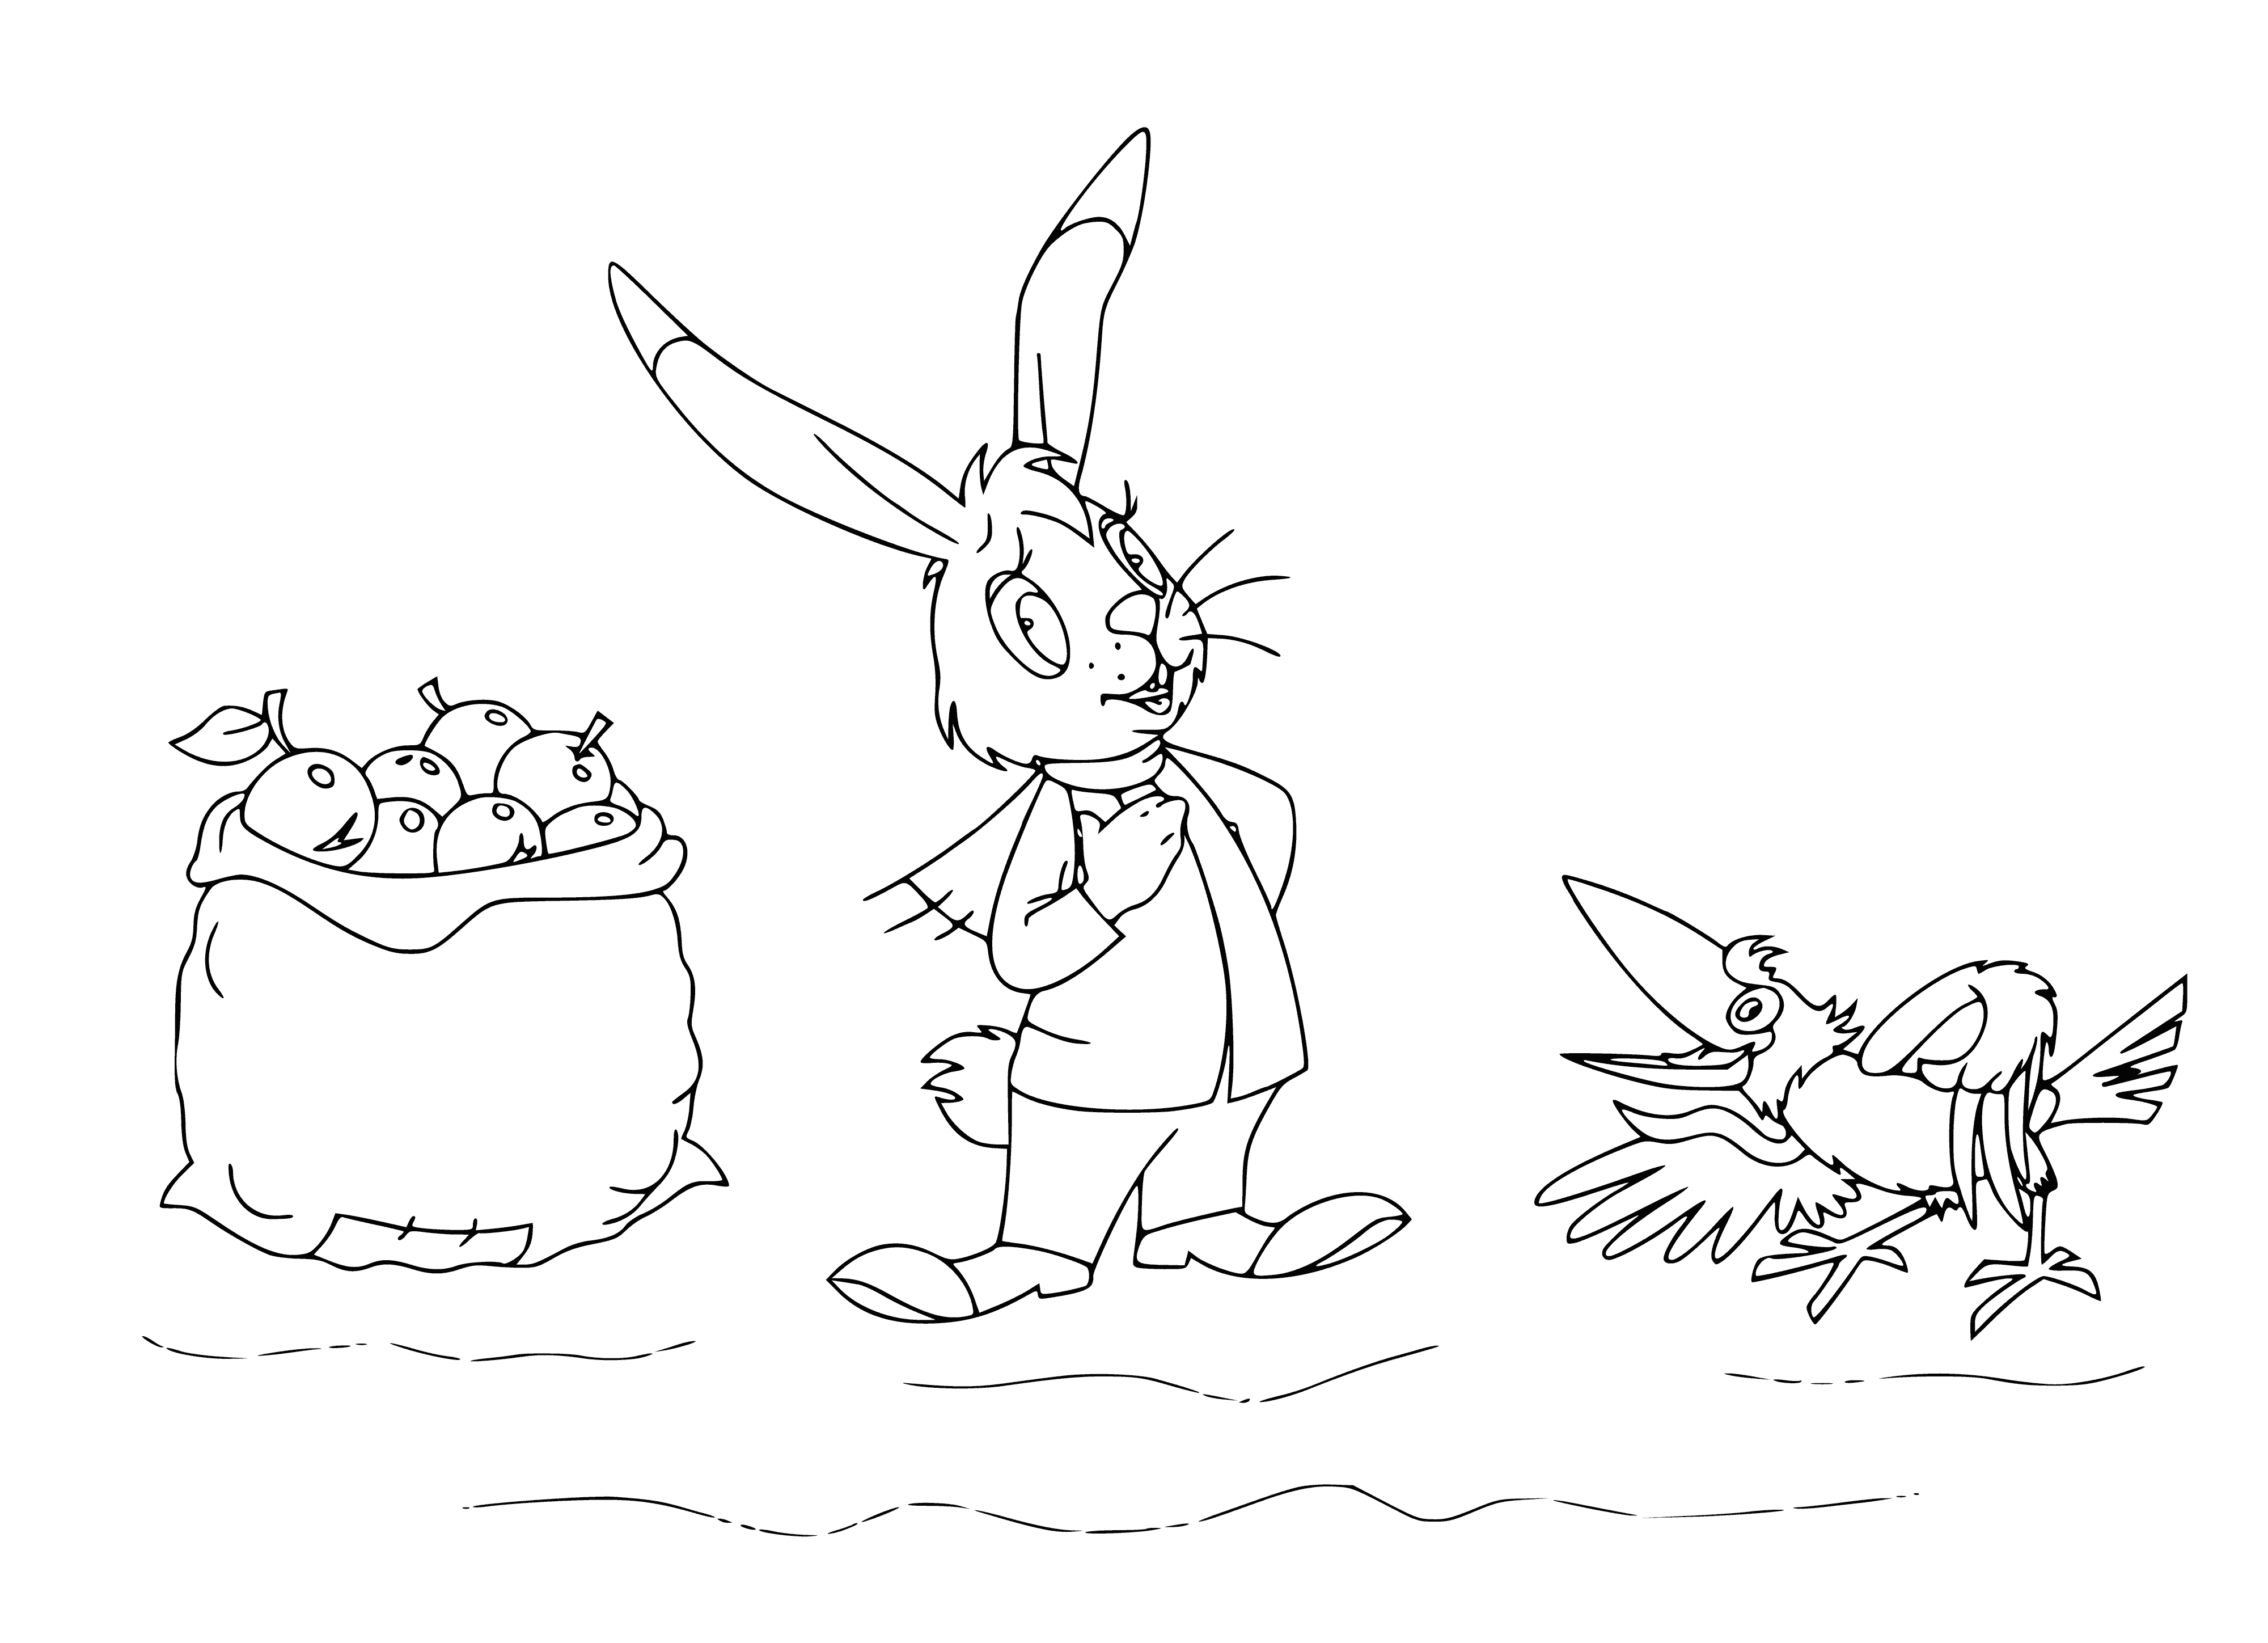 coloring page: A crow laughs at a hare, who's upset, while a bag of apples lays on the ground nearby.